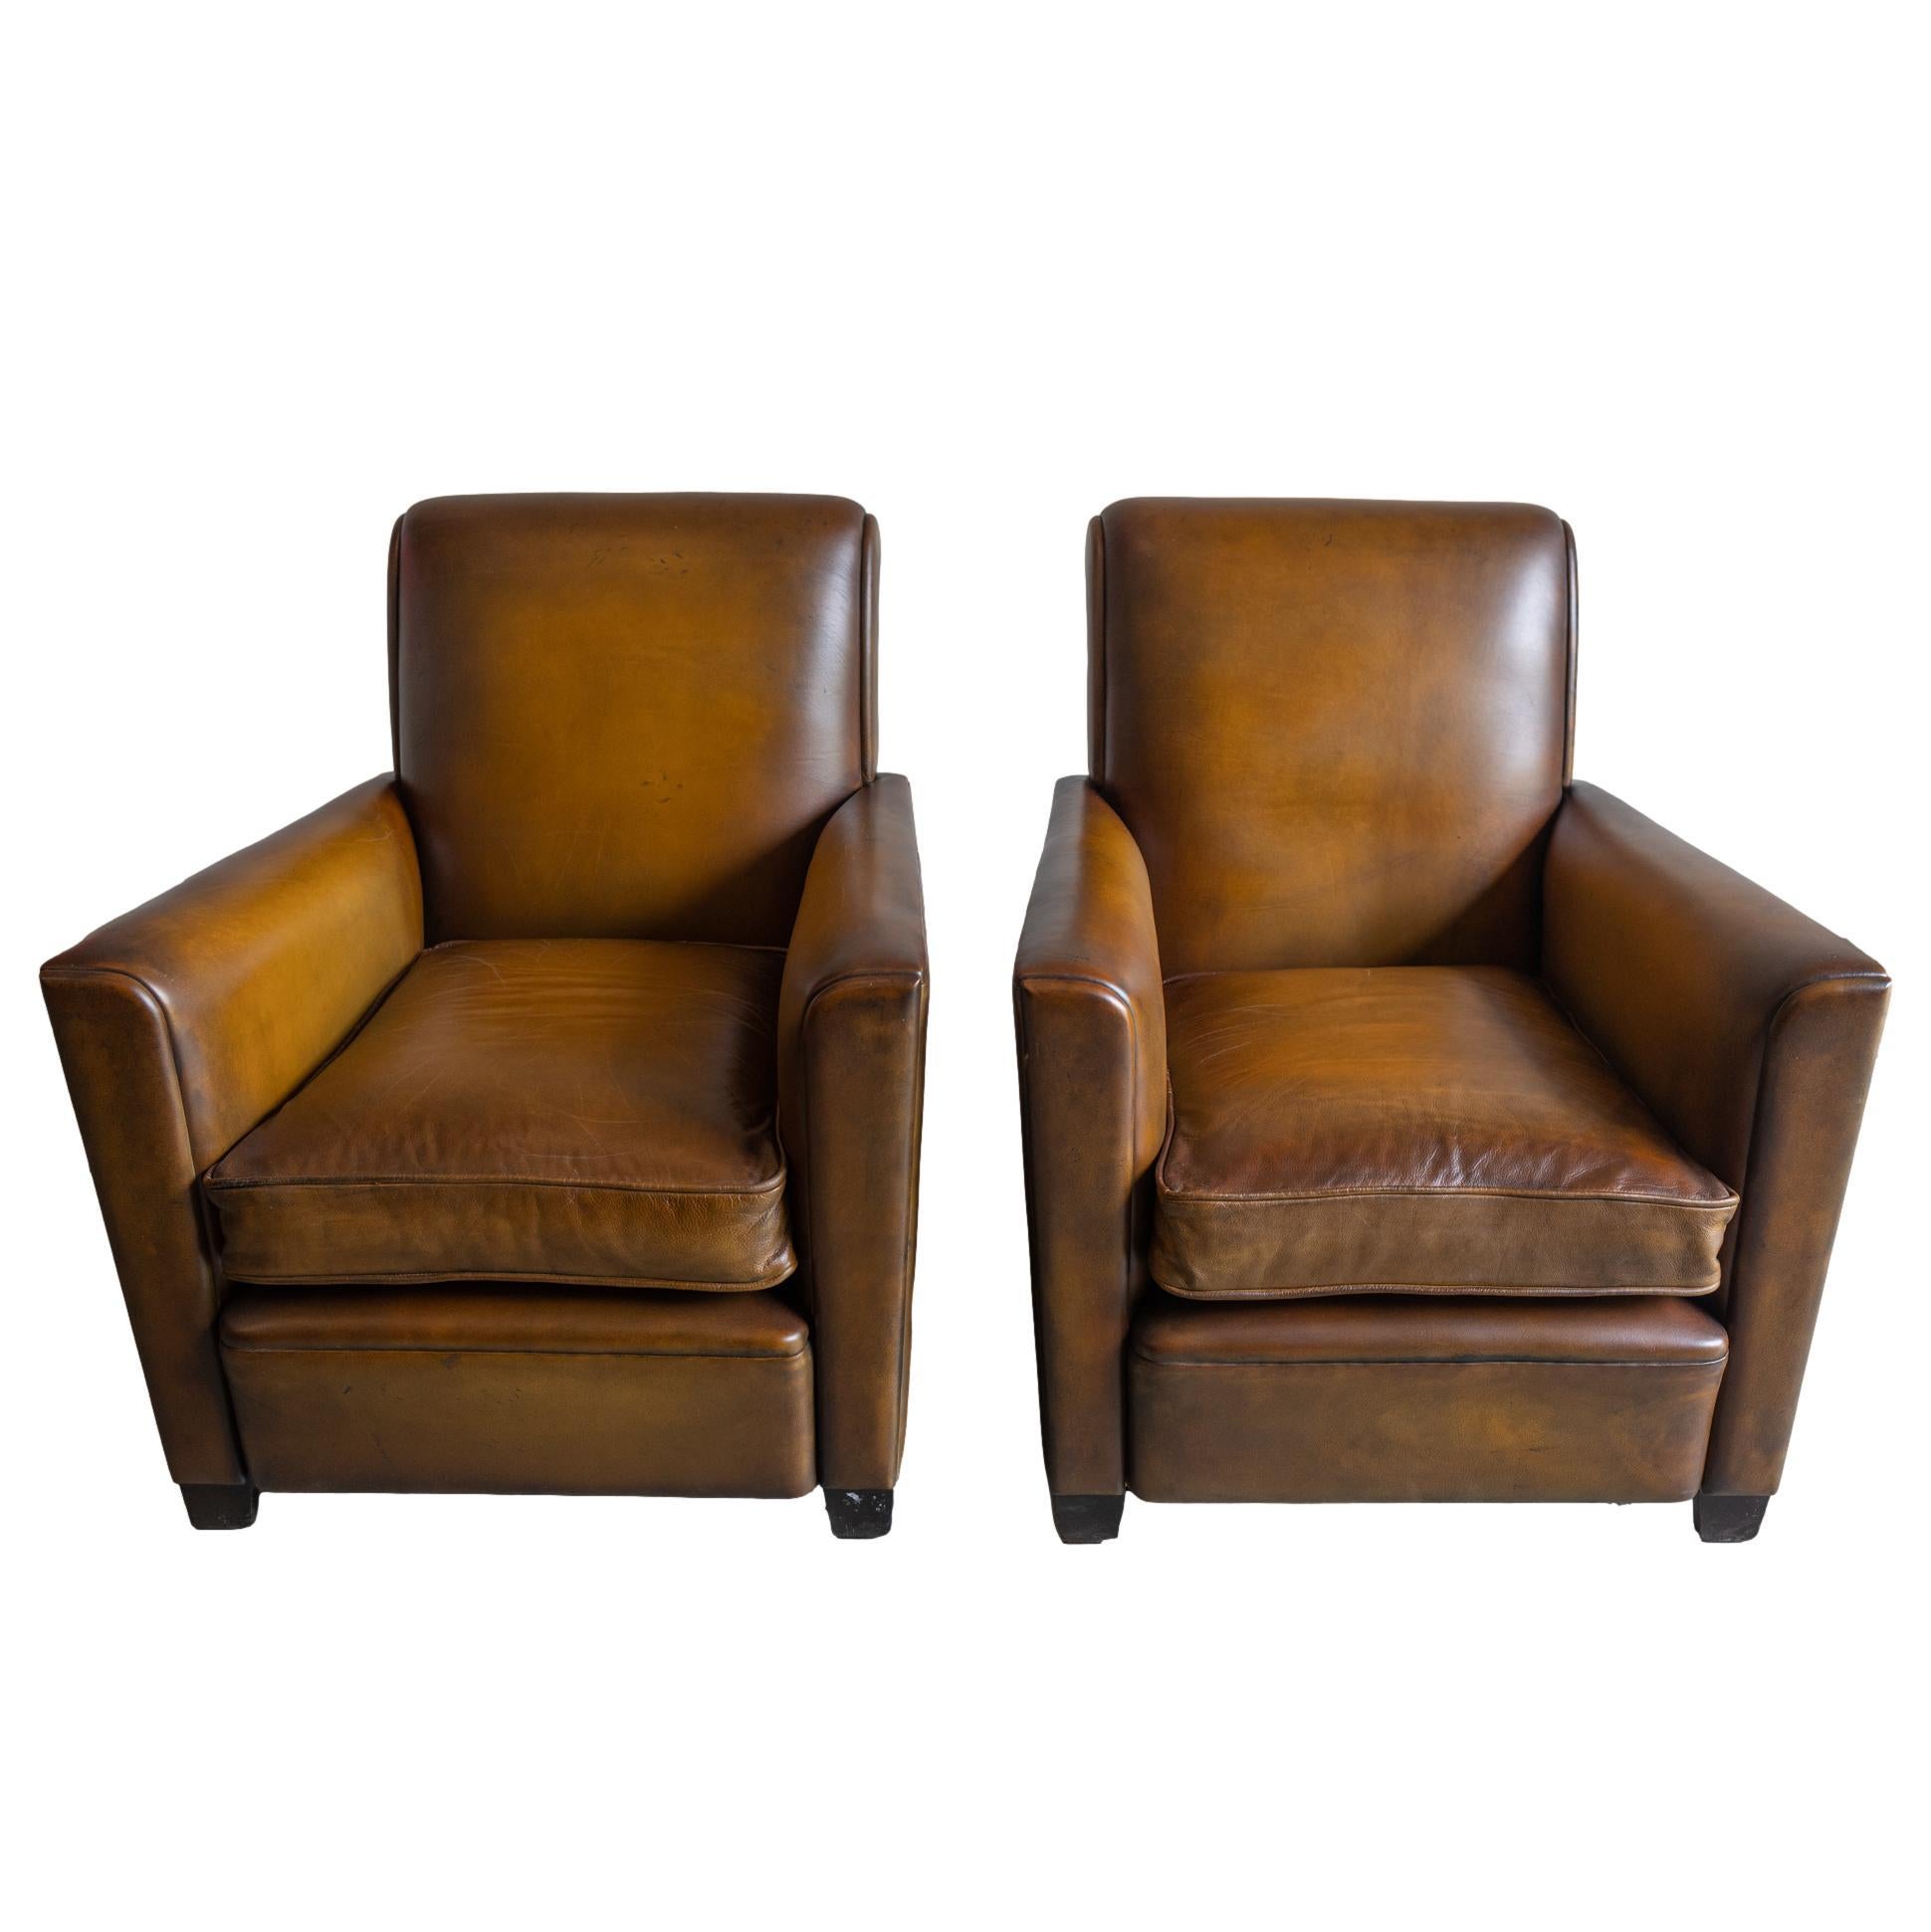 A Pair of Art Deco Leather Club Chairs of geometrical, flared form, the deeply slanted back slightly rolled, on tapered front feet, the rear feet flared, with down-filled over-stuffed cushions, French, ca. 1935.